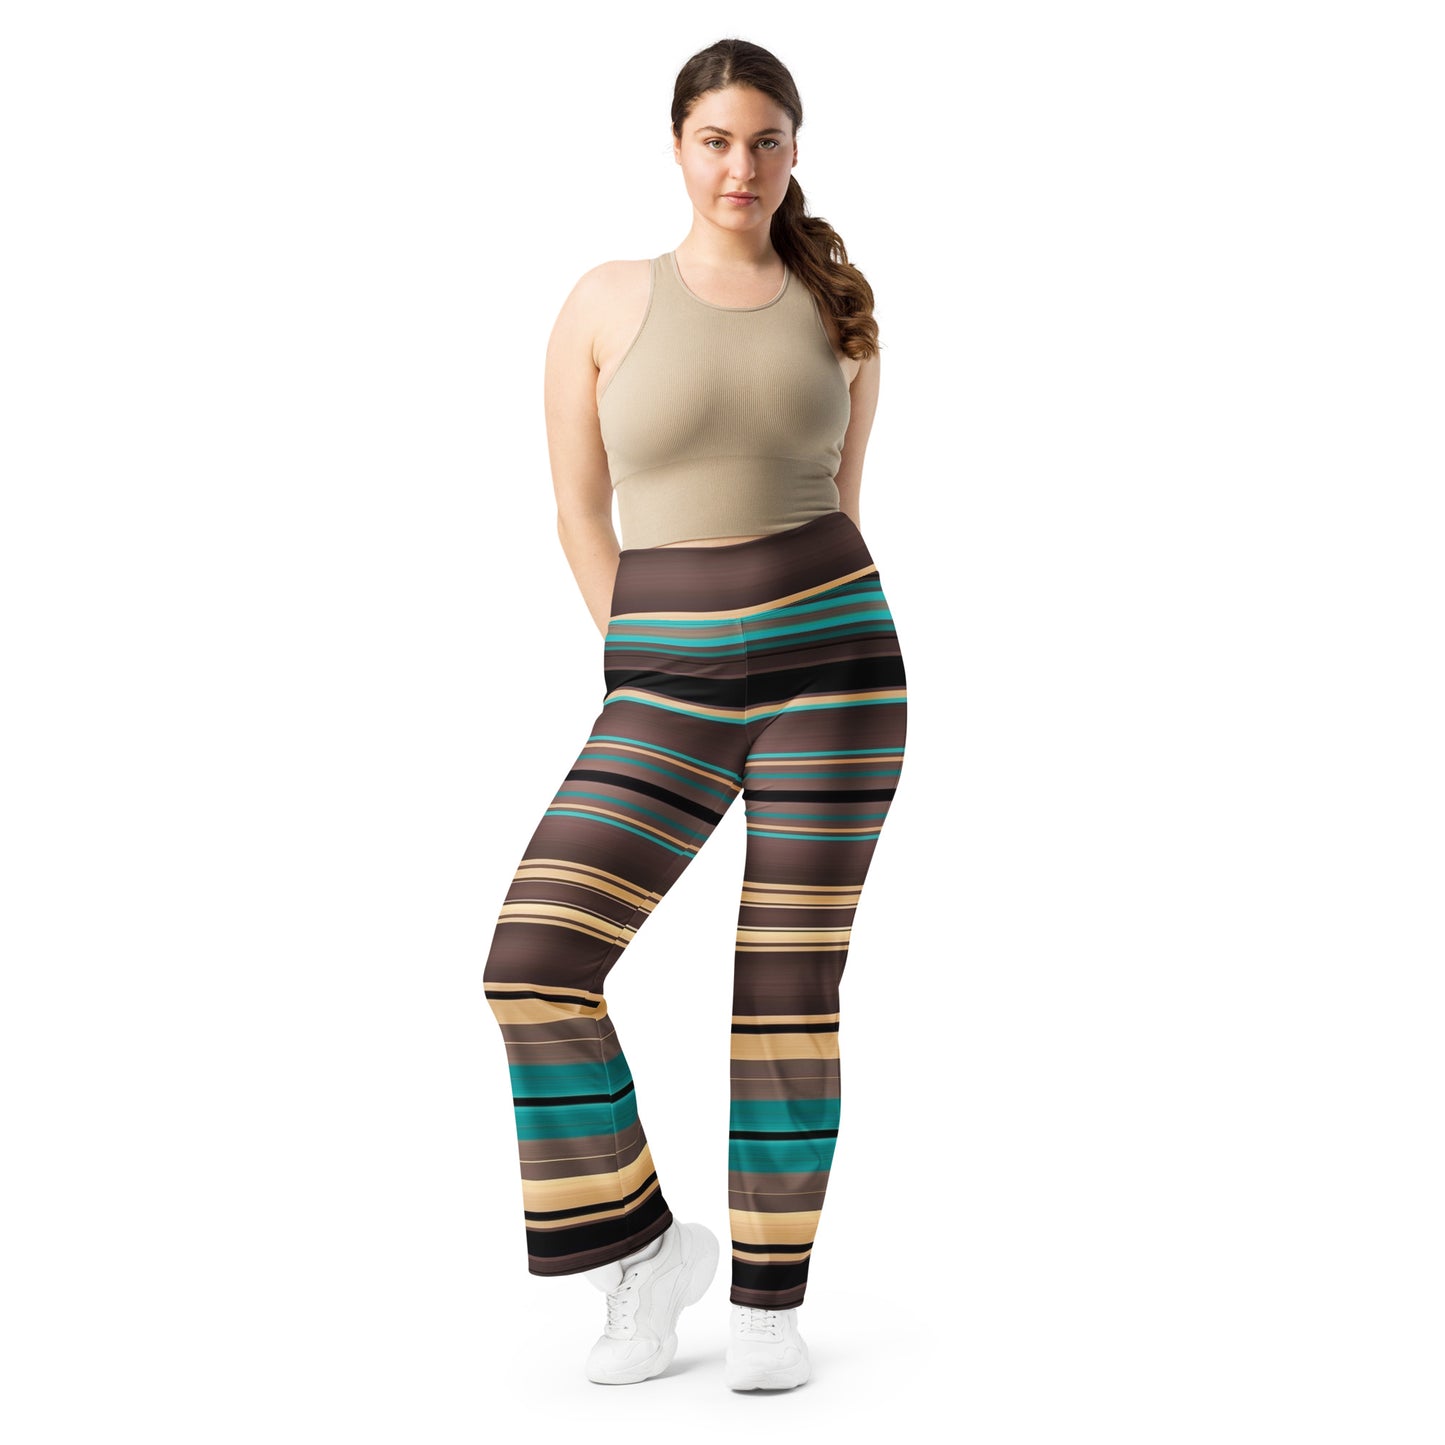 Shades of Brown Mexican Serape Printed Flare leggings